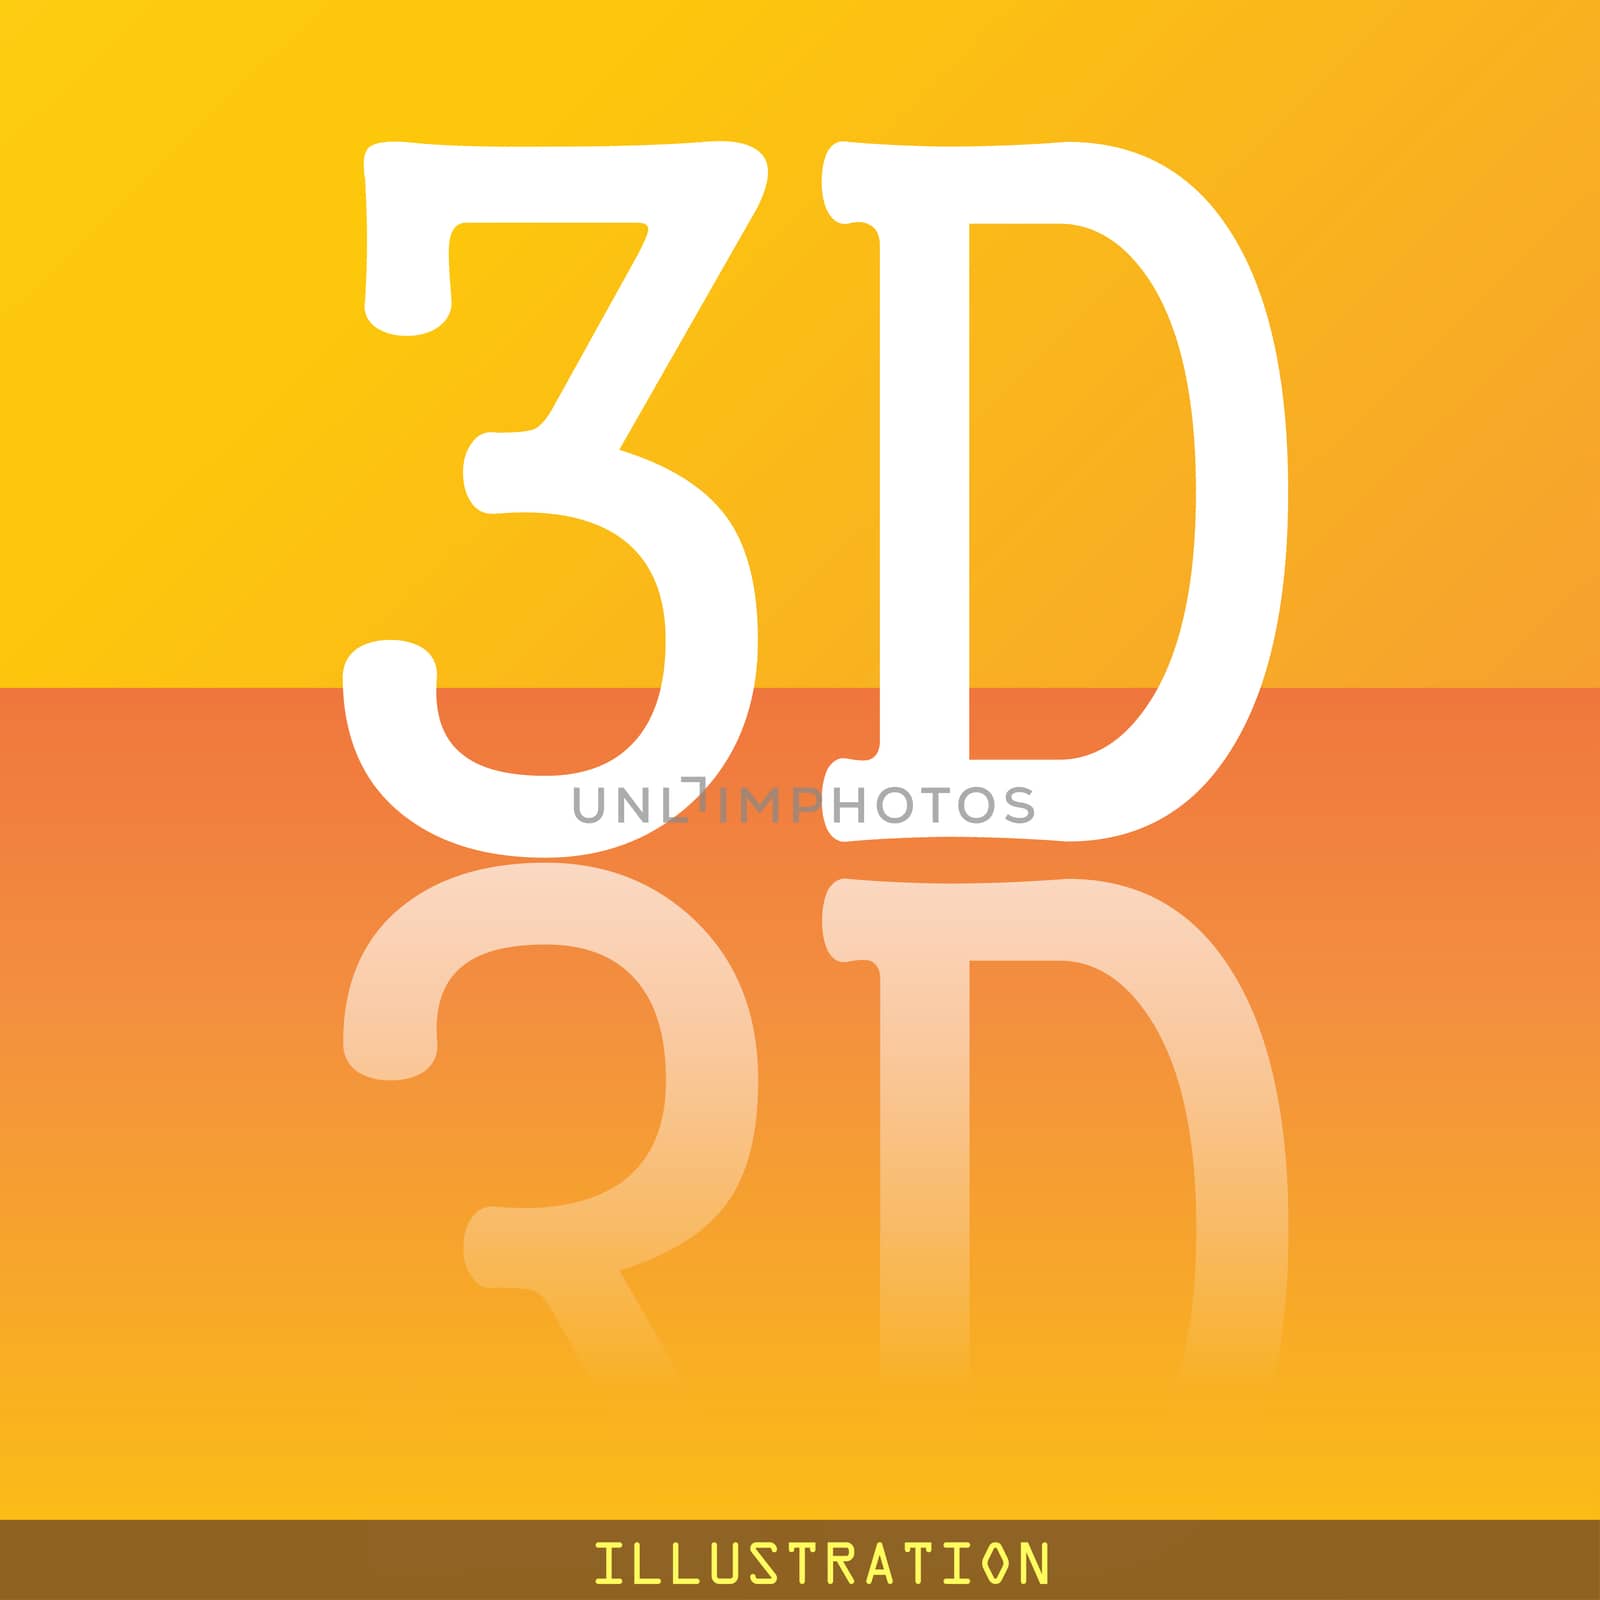 3D icon symbol Flat modern web design with reflection and space for your text. illustration. Raster version